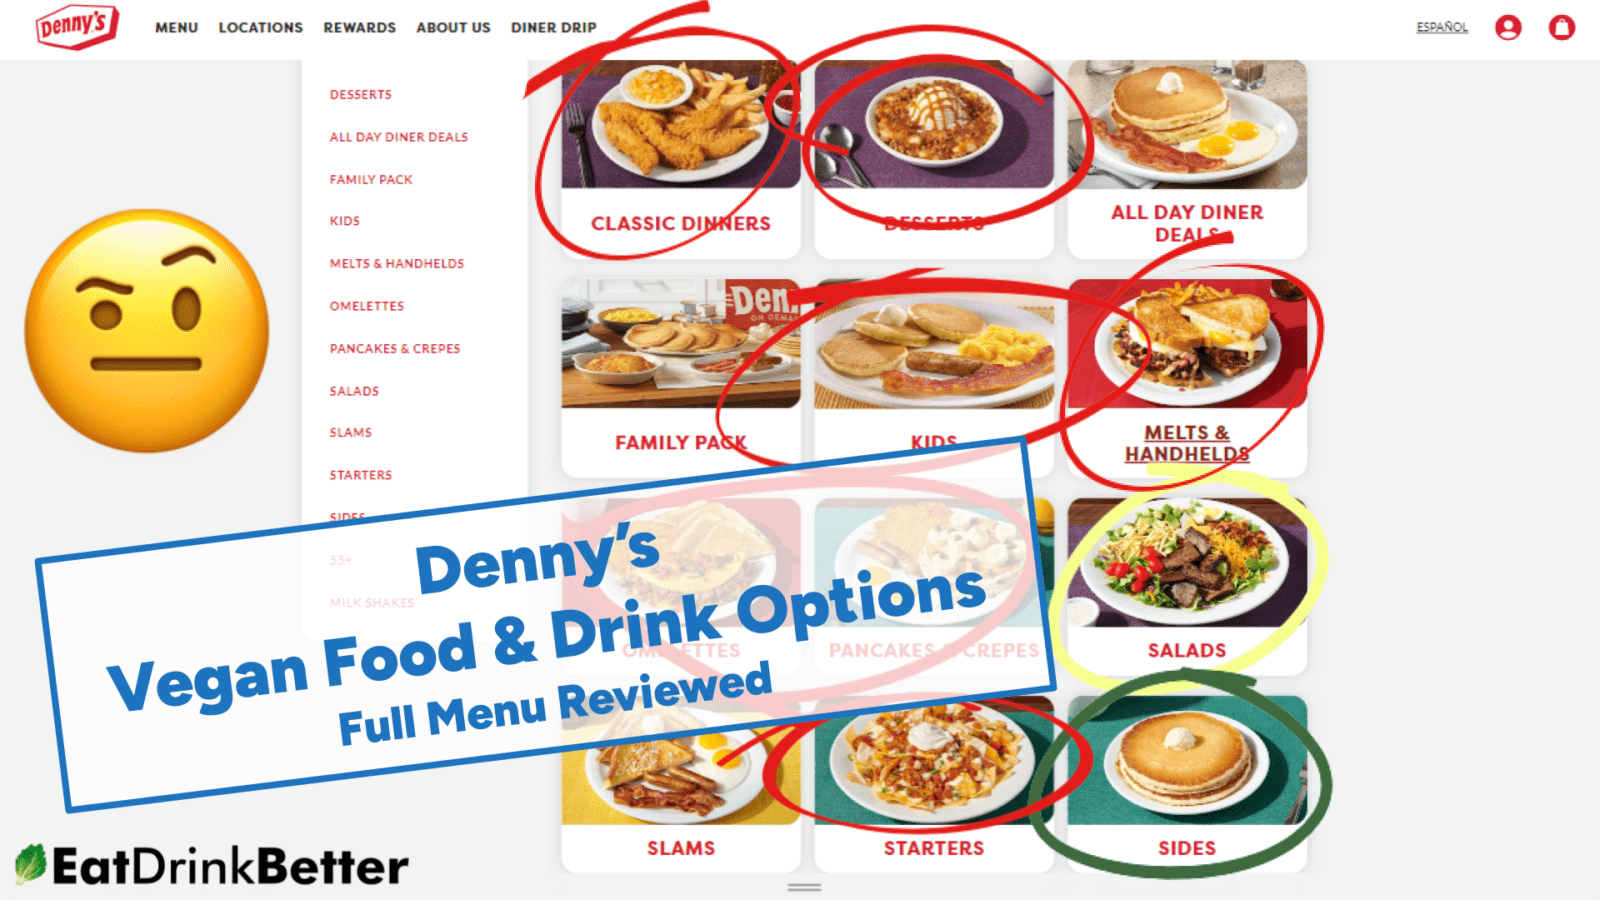 Denny's Menu  Browse Our Full Menu of Delicious Options